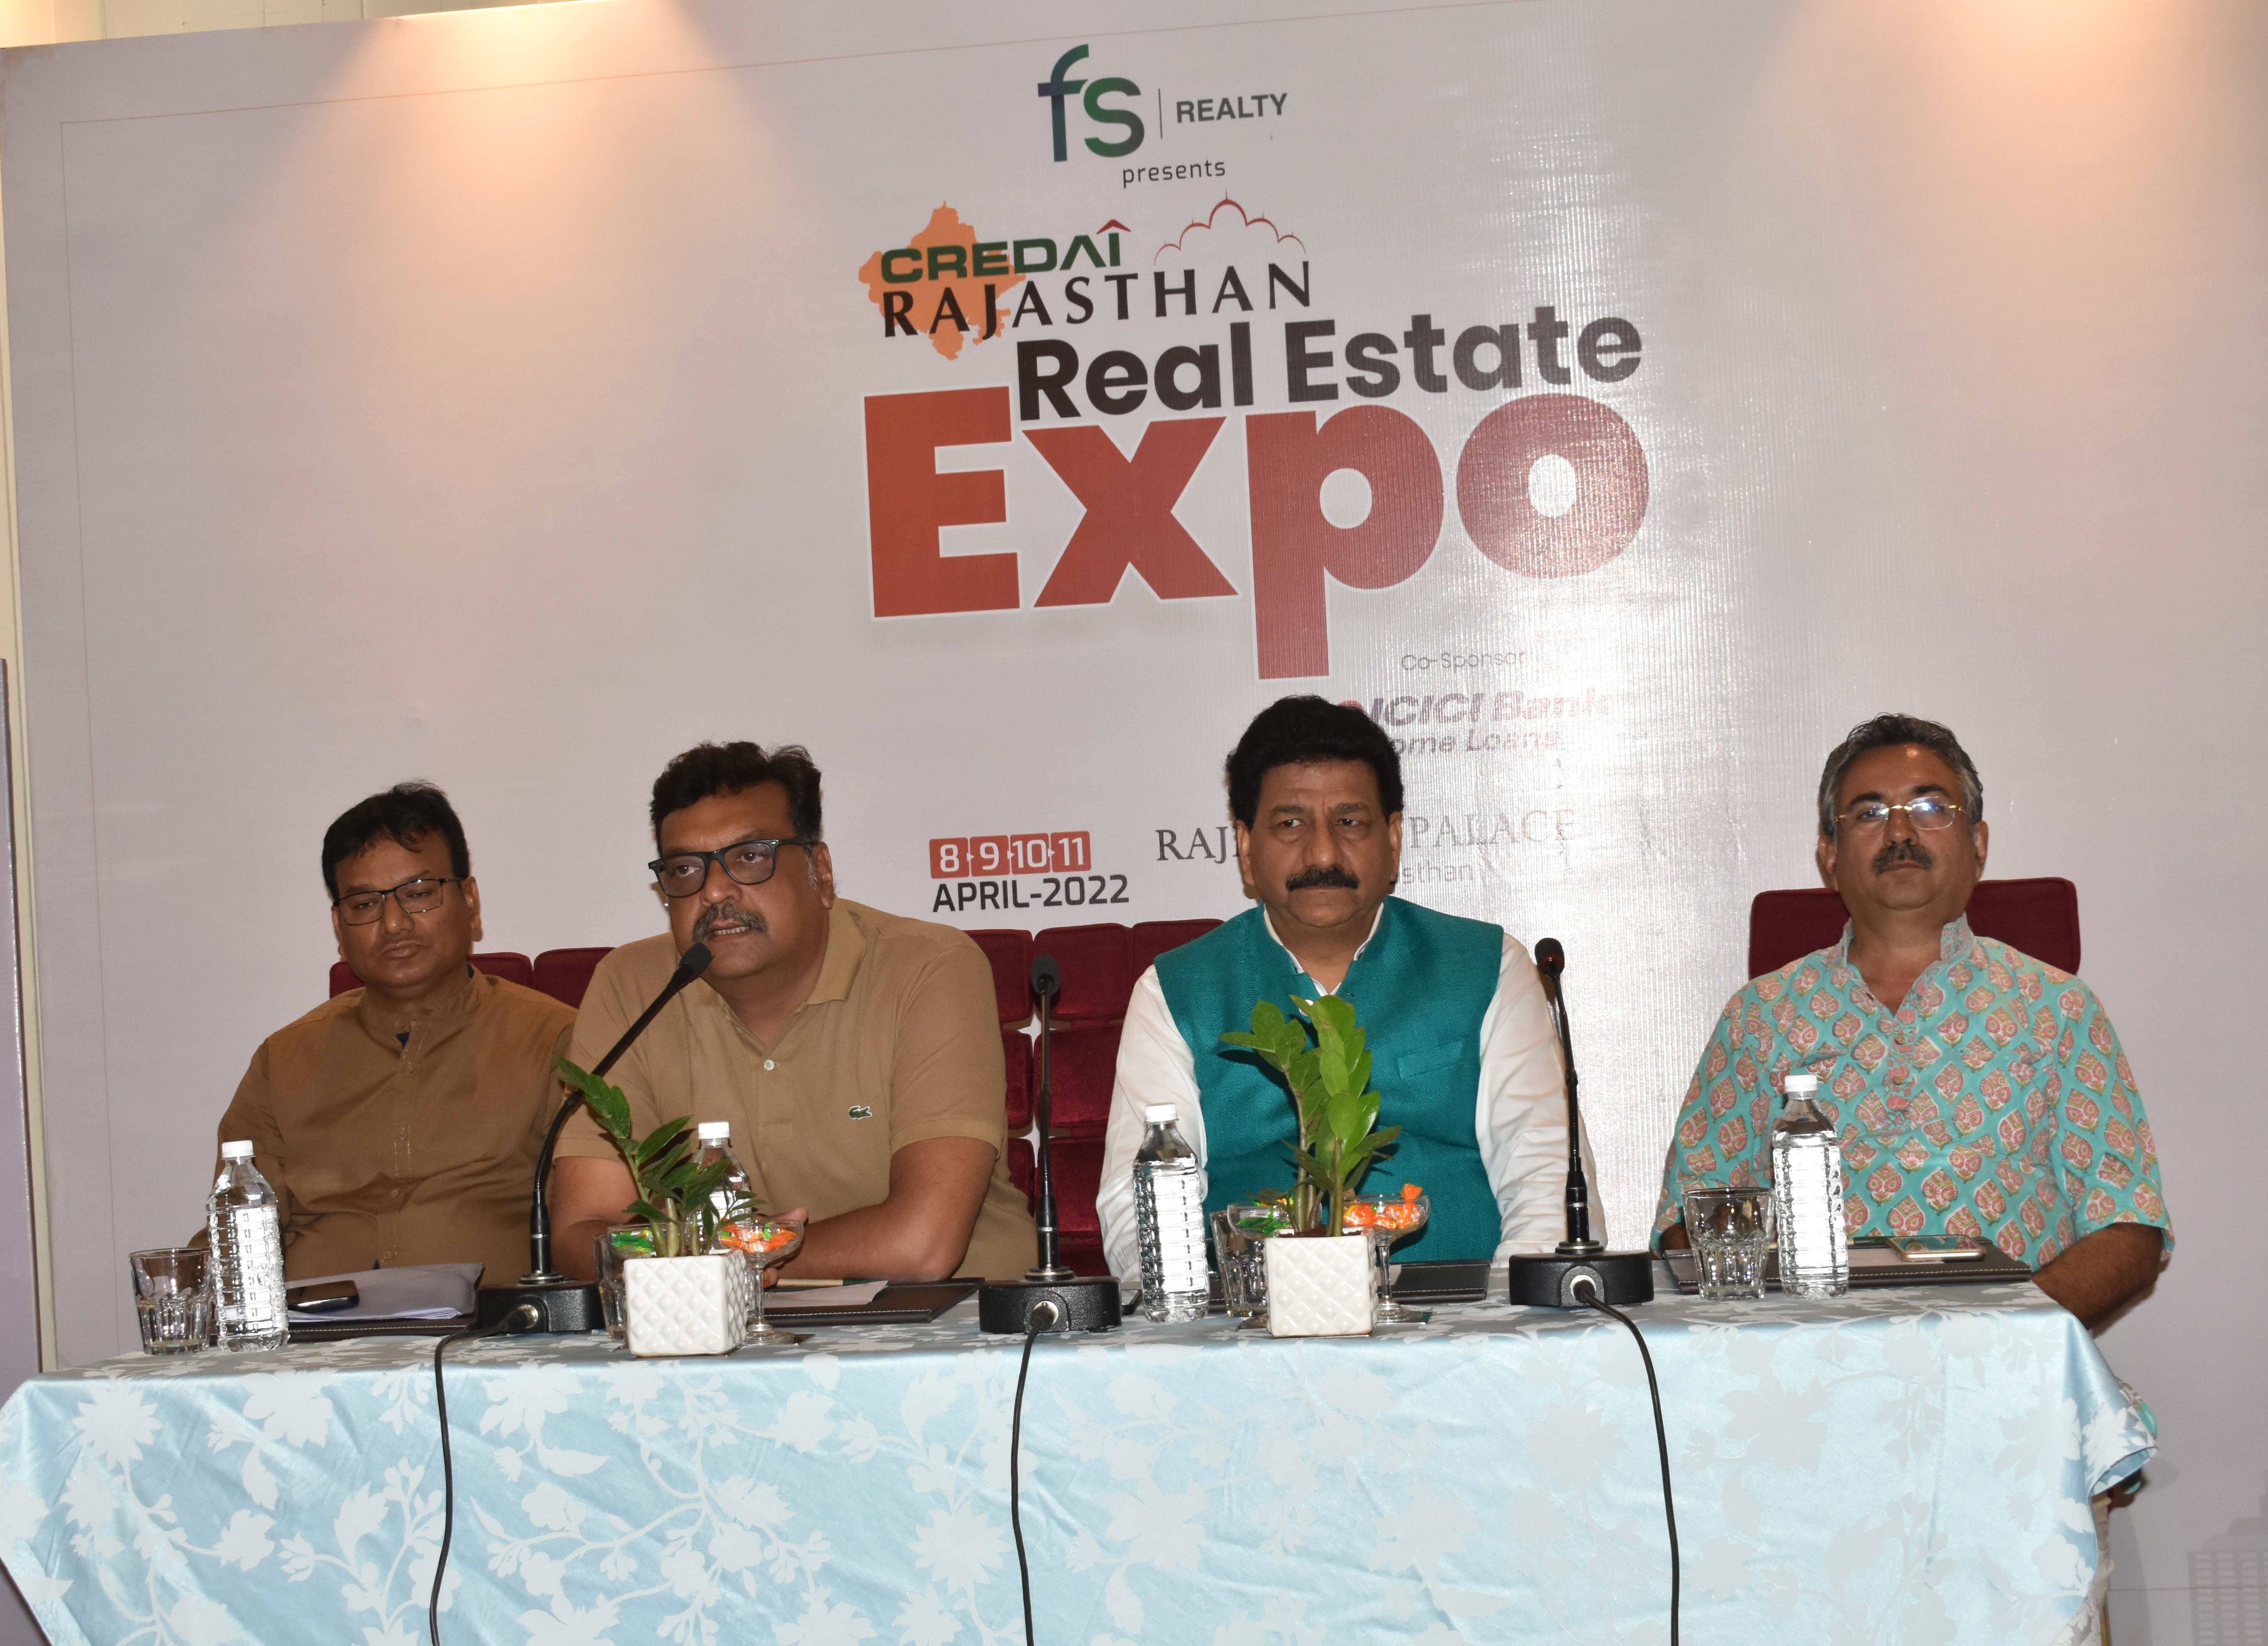 ‘REAL ESTATE EXPO’ TO BE ORGANIZED BY CREDAI RAJASTHAN FROM 8 APRIL AT RAJMAHAL PALACE